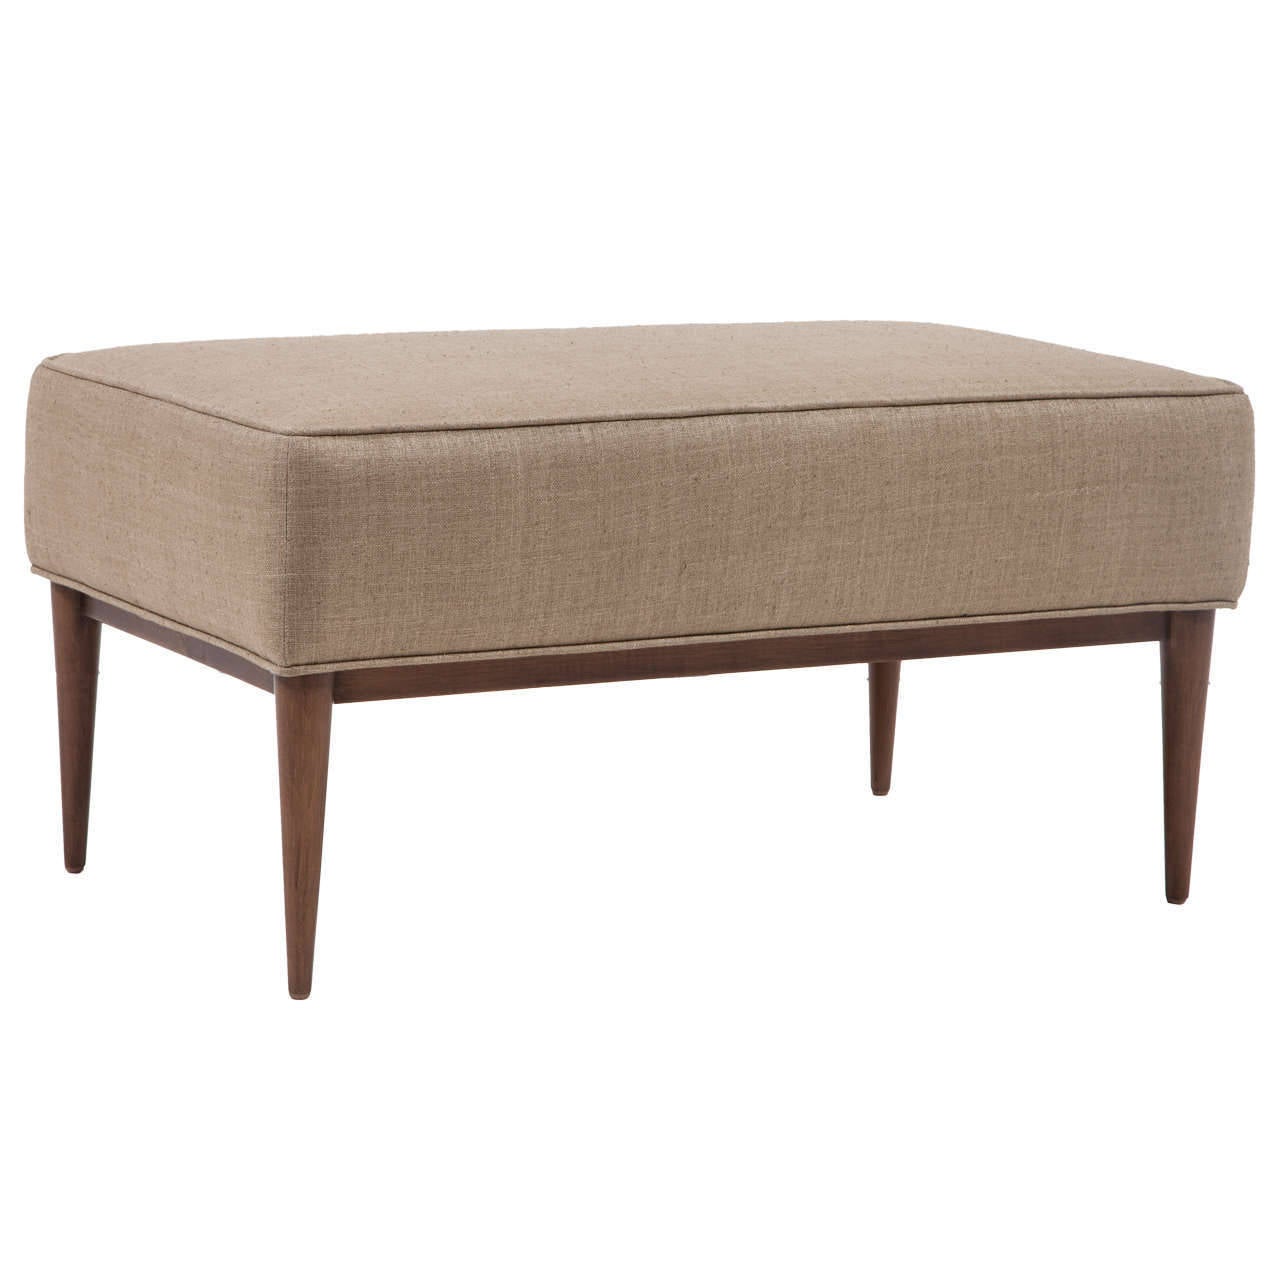 Lindy ottoman on solid turned leg base.

COM requirements: 2 yards.
5% up-charge for contrasting fabrics and or welting. 
COL requirements:40 sq. feet.
 5% percentage up-charge for all COL or exotic materials.

Custom orders have a lead time